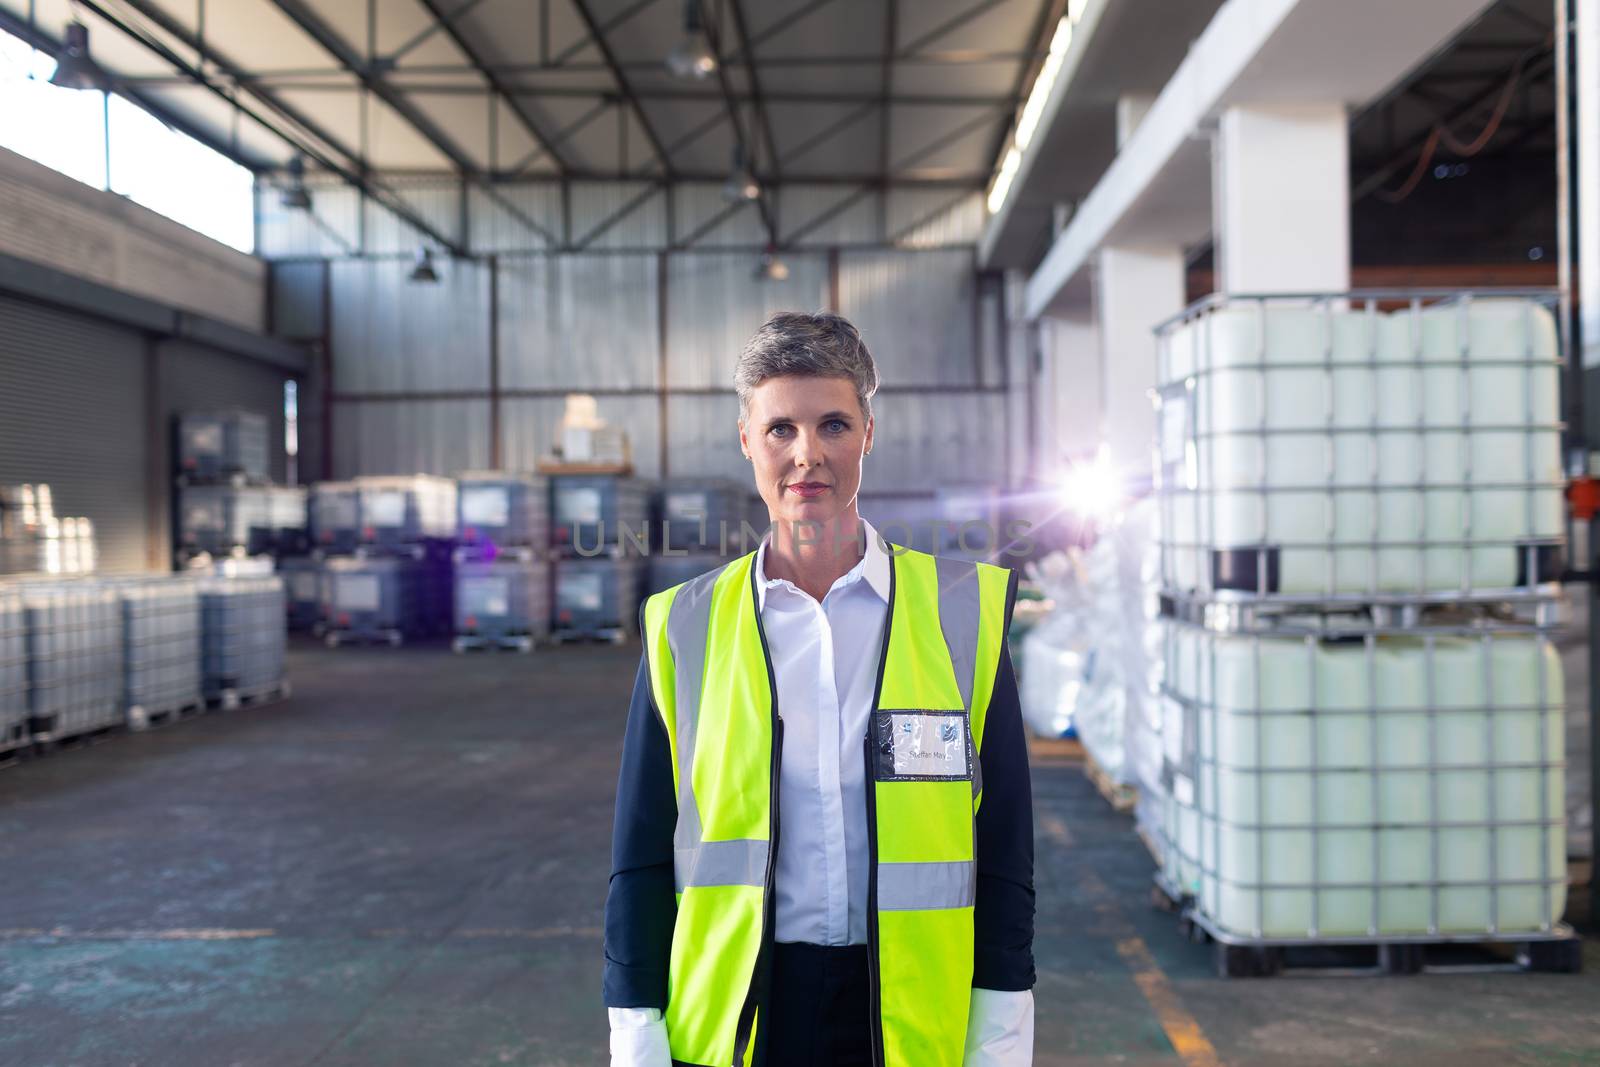 Portrait of Caucasian mature female staff in reflective jacket standing in warehouse. This is a freight transportation and distribution warehouse. Industrial and industrial workers concept